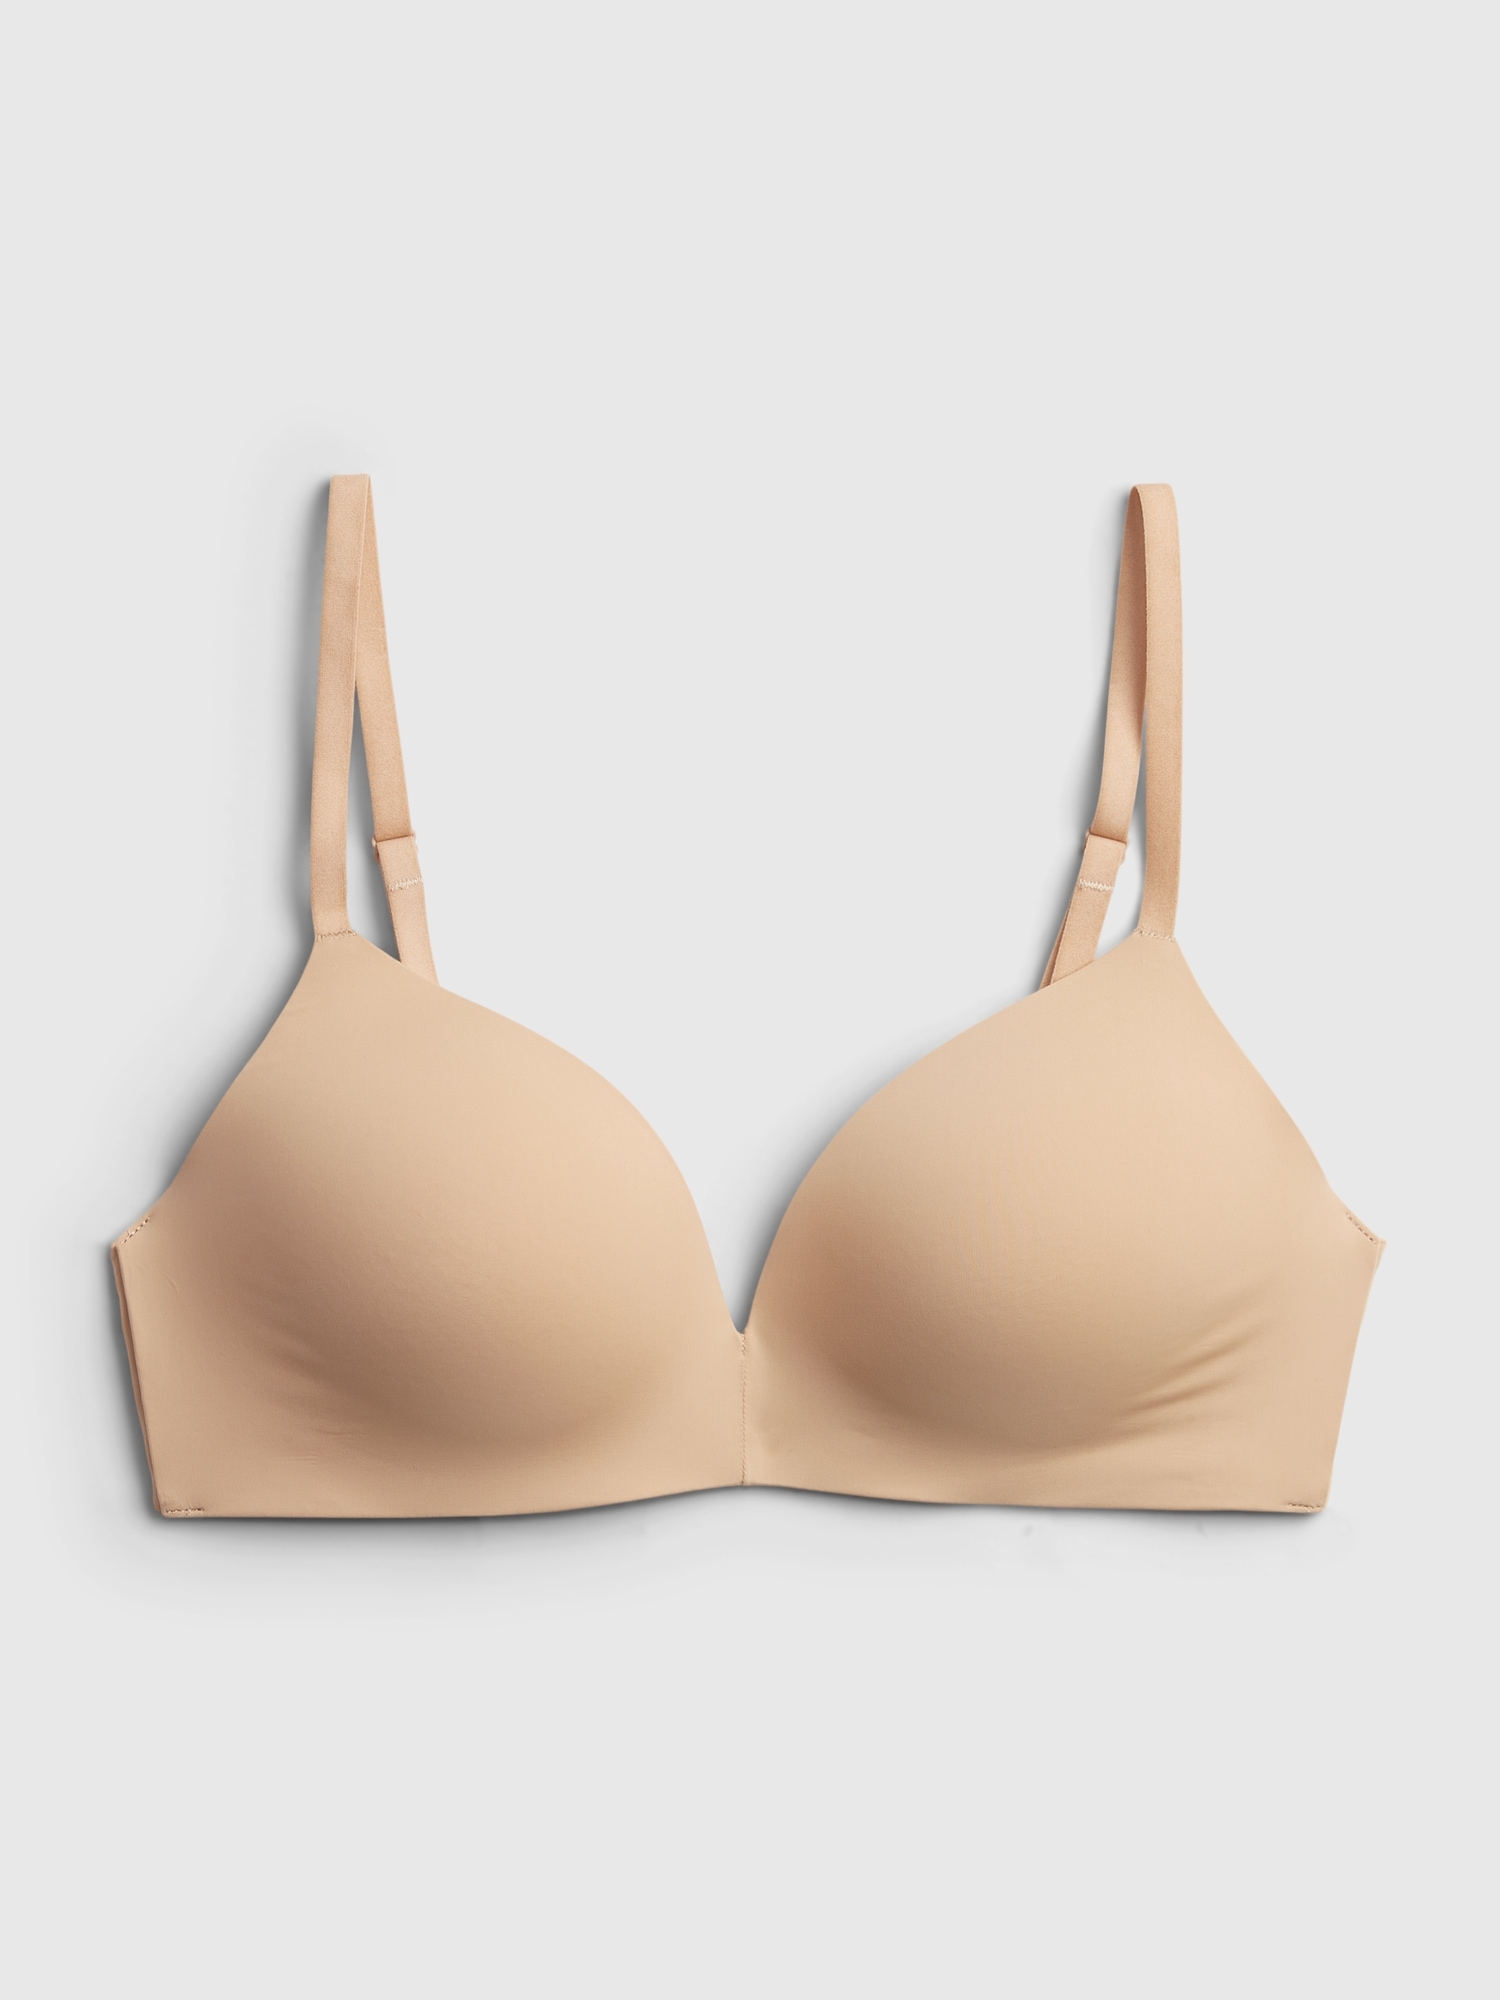 Non-Wired Non-Padded T-shirt Bra